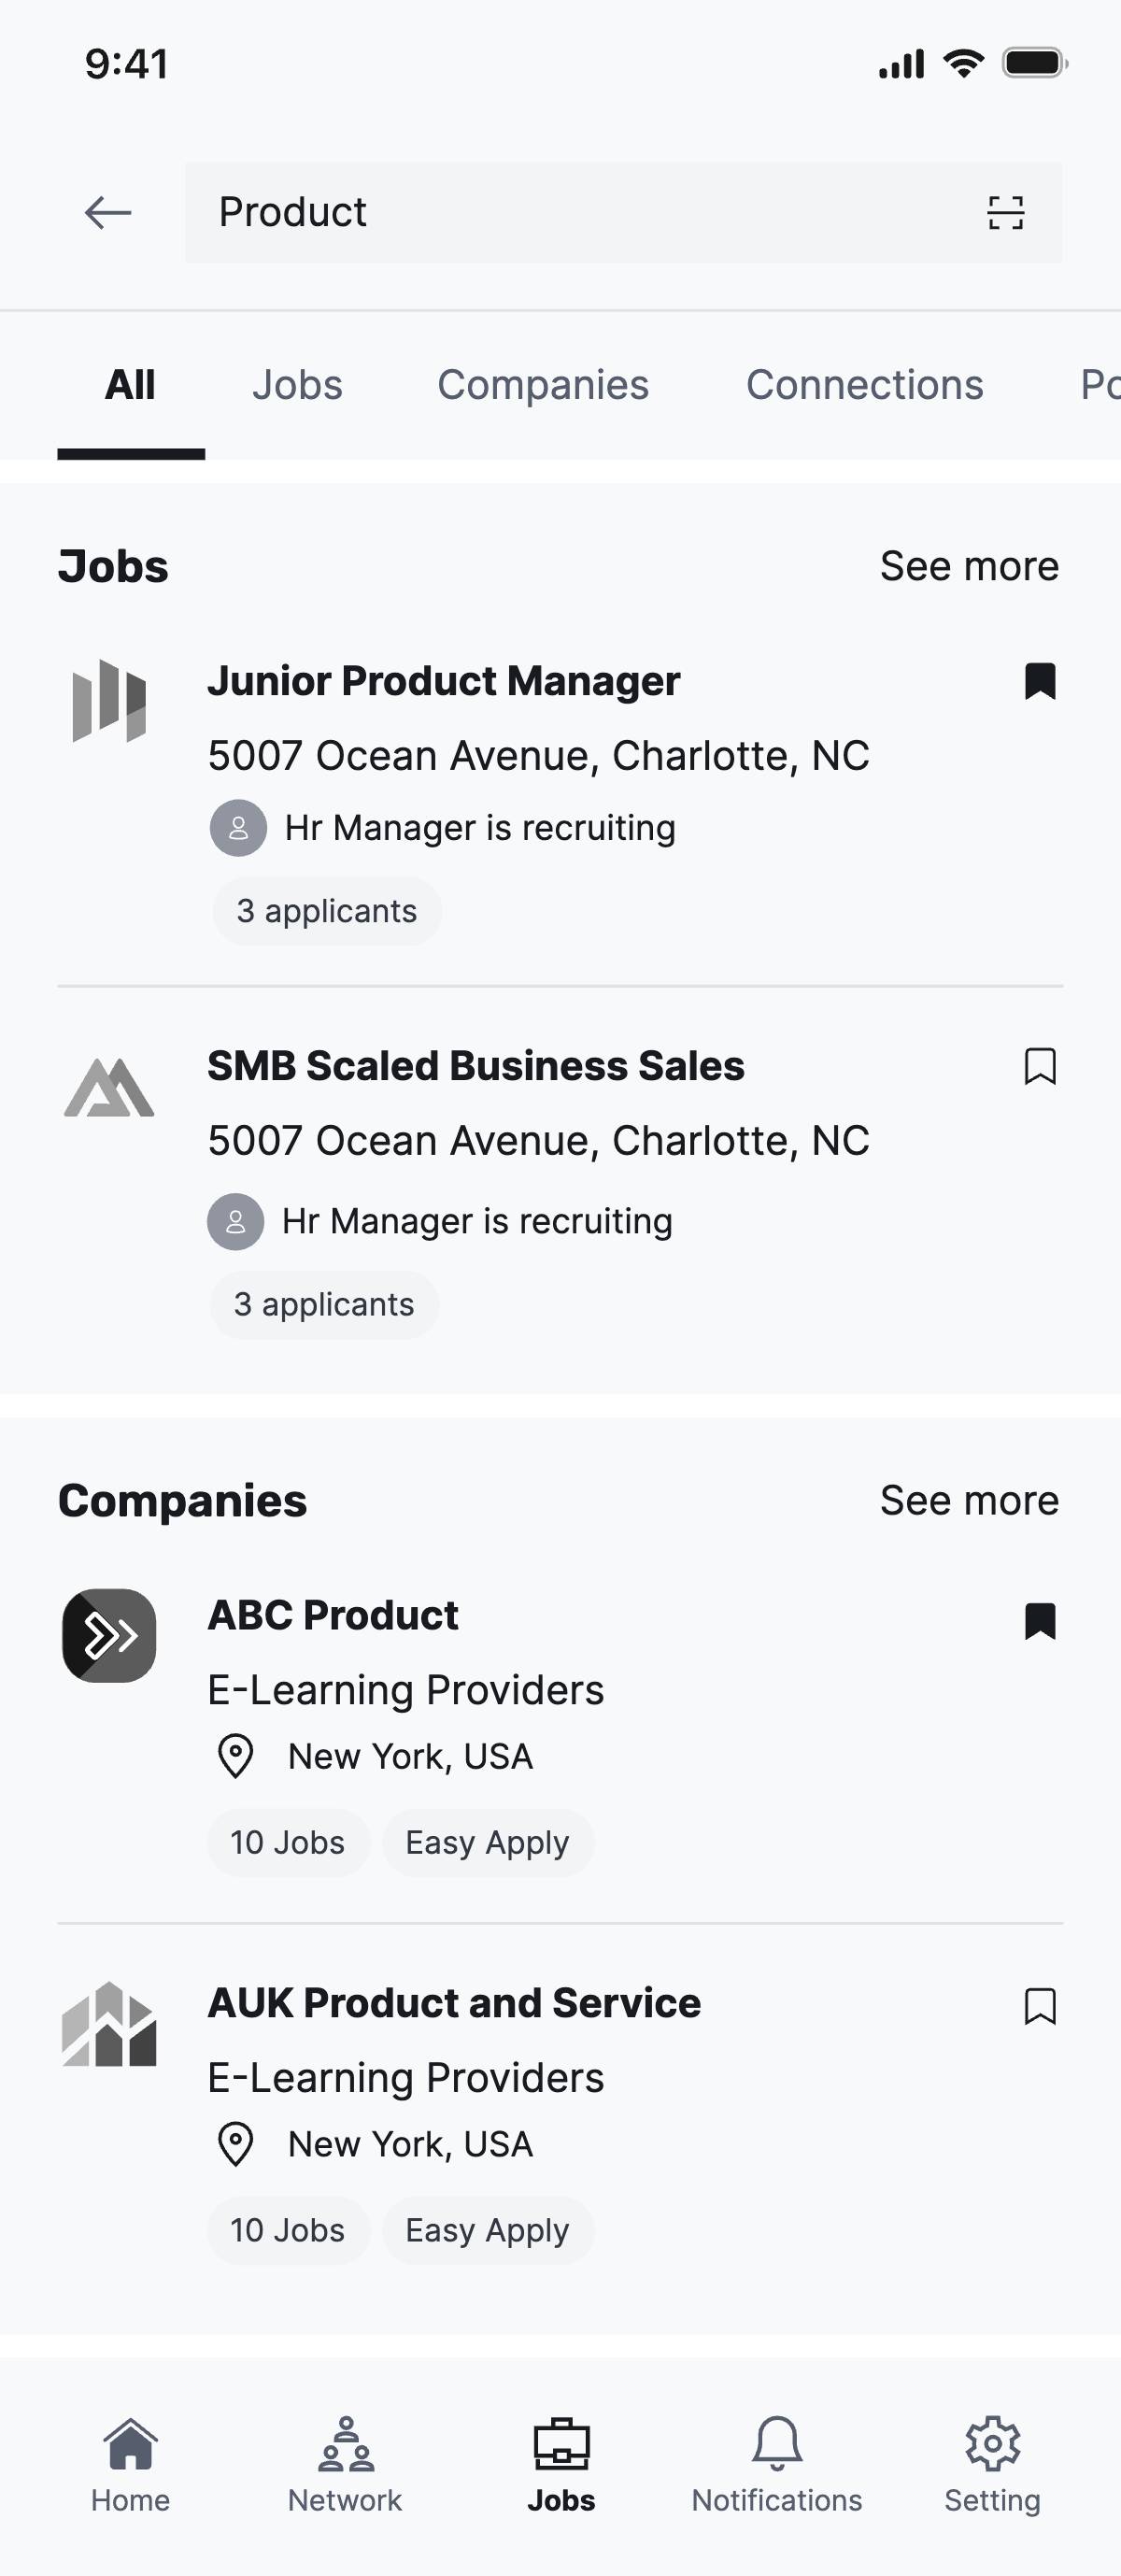 Job listing - Search results